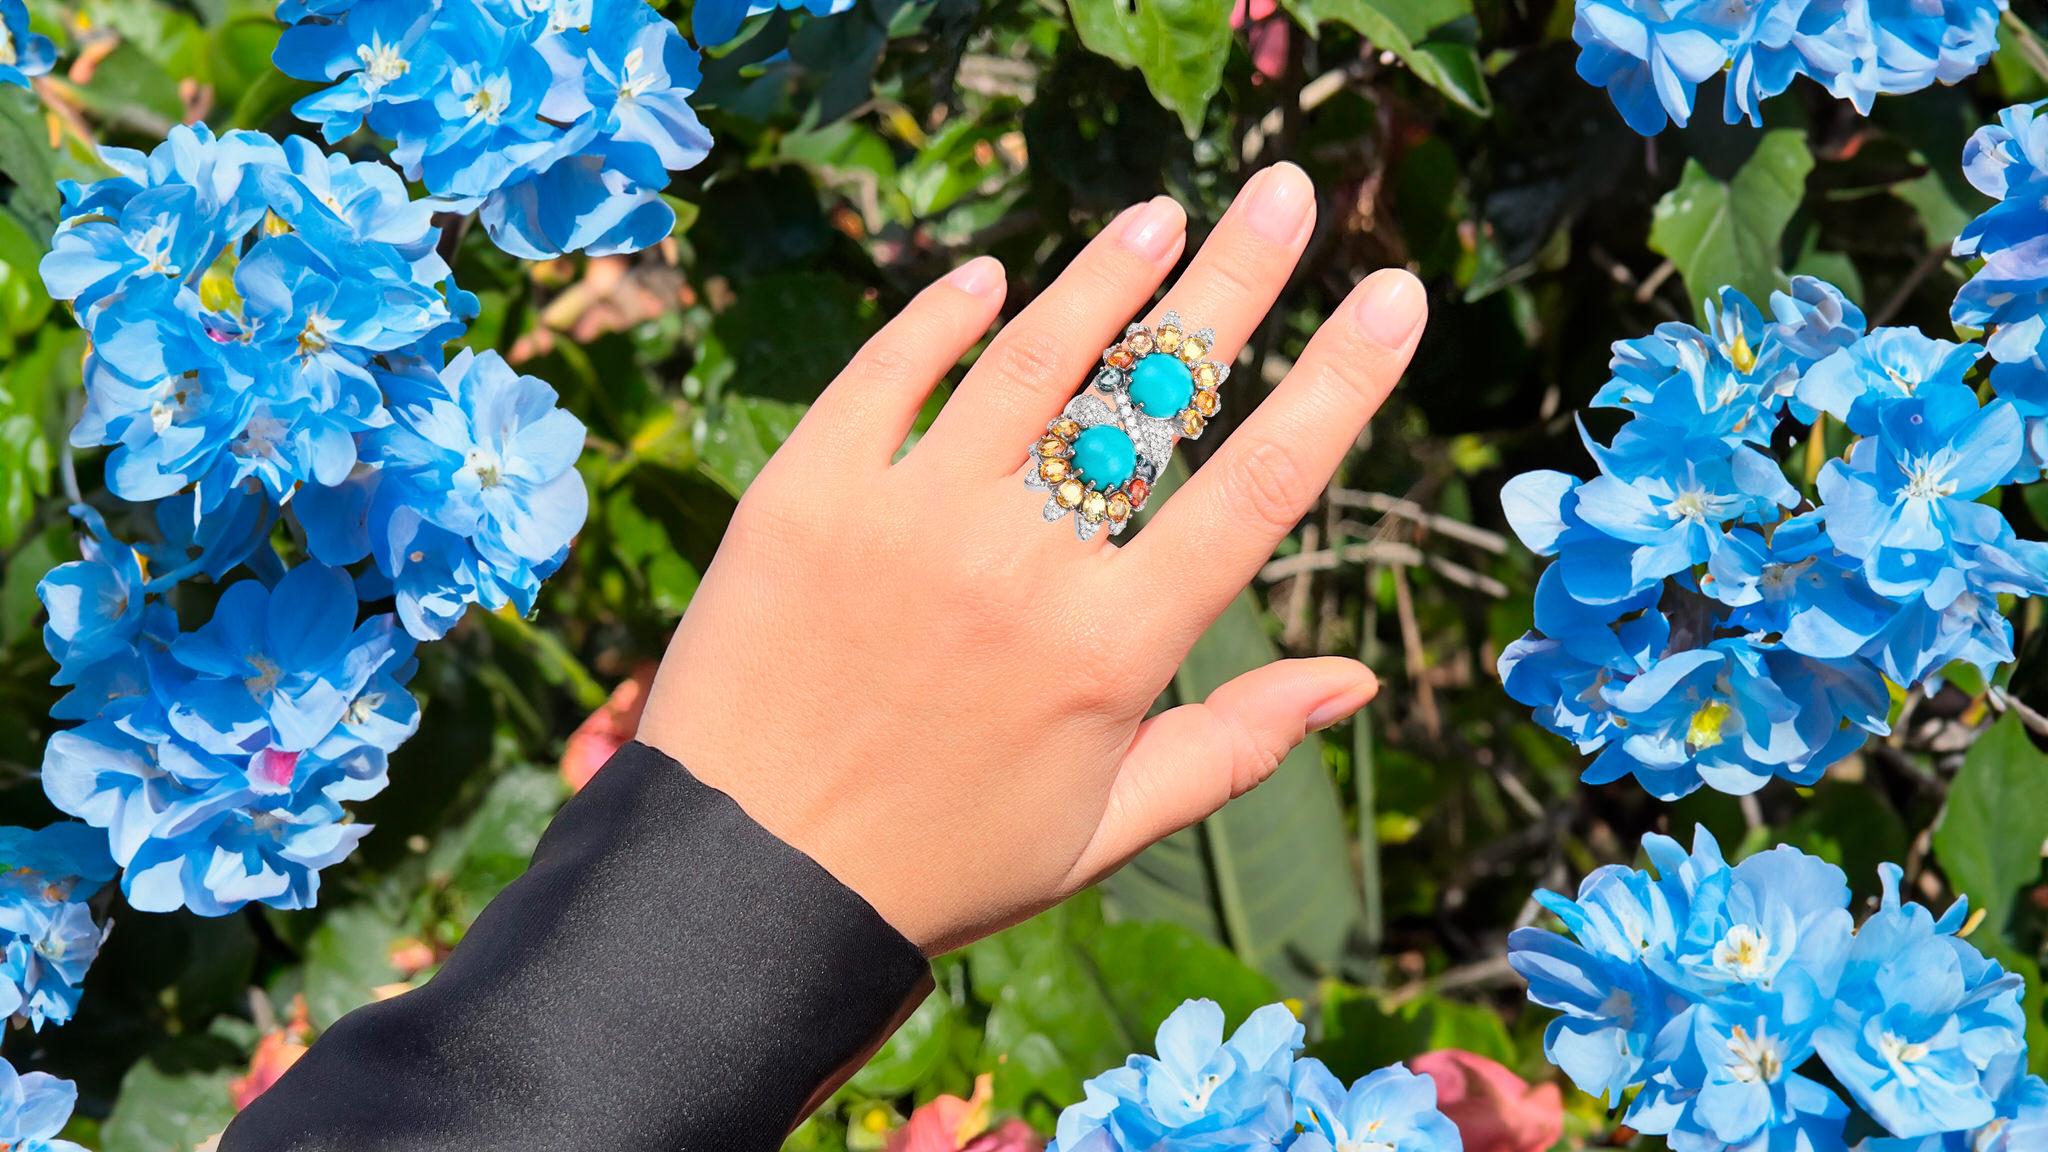 It comes with the Gemological Appraisal by GIA GG/AJP
All Gemstones are Natural
2 Turquoise = 8.86 Carats
16 Multicolor Sapphires = 6.70 Carats
117 Diamonds = 1.09 Carats
Metal: Rhodium Plated Sterling Silver
Ring Size: 7* US
*It can be resized